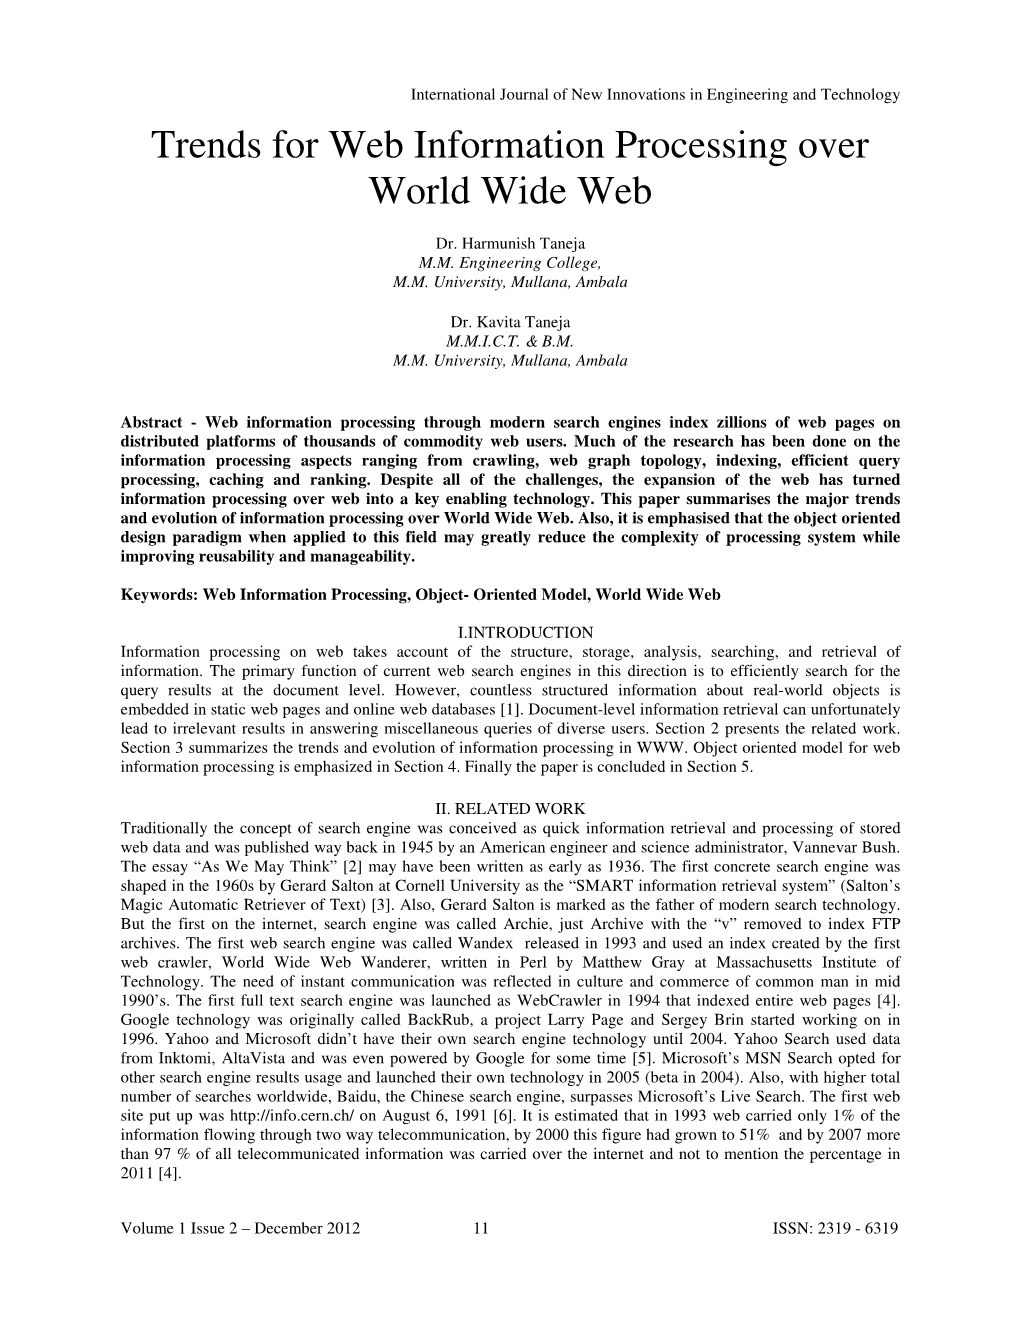 Trends for Web Information Processing Over World Wide Web